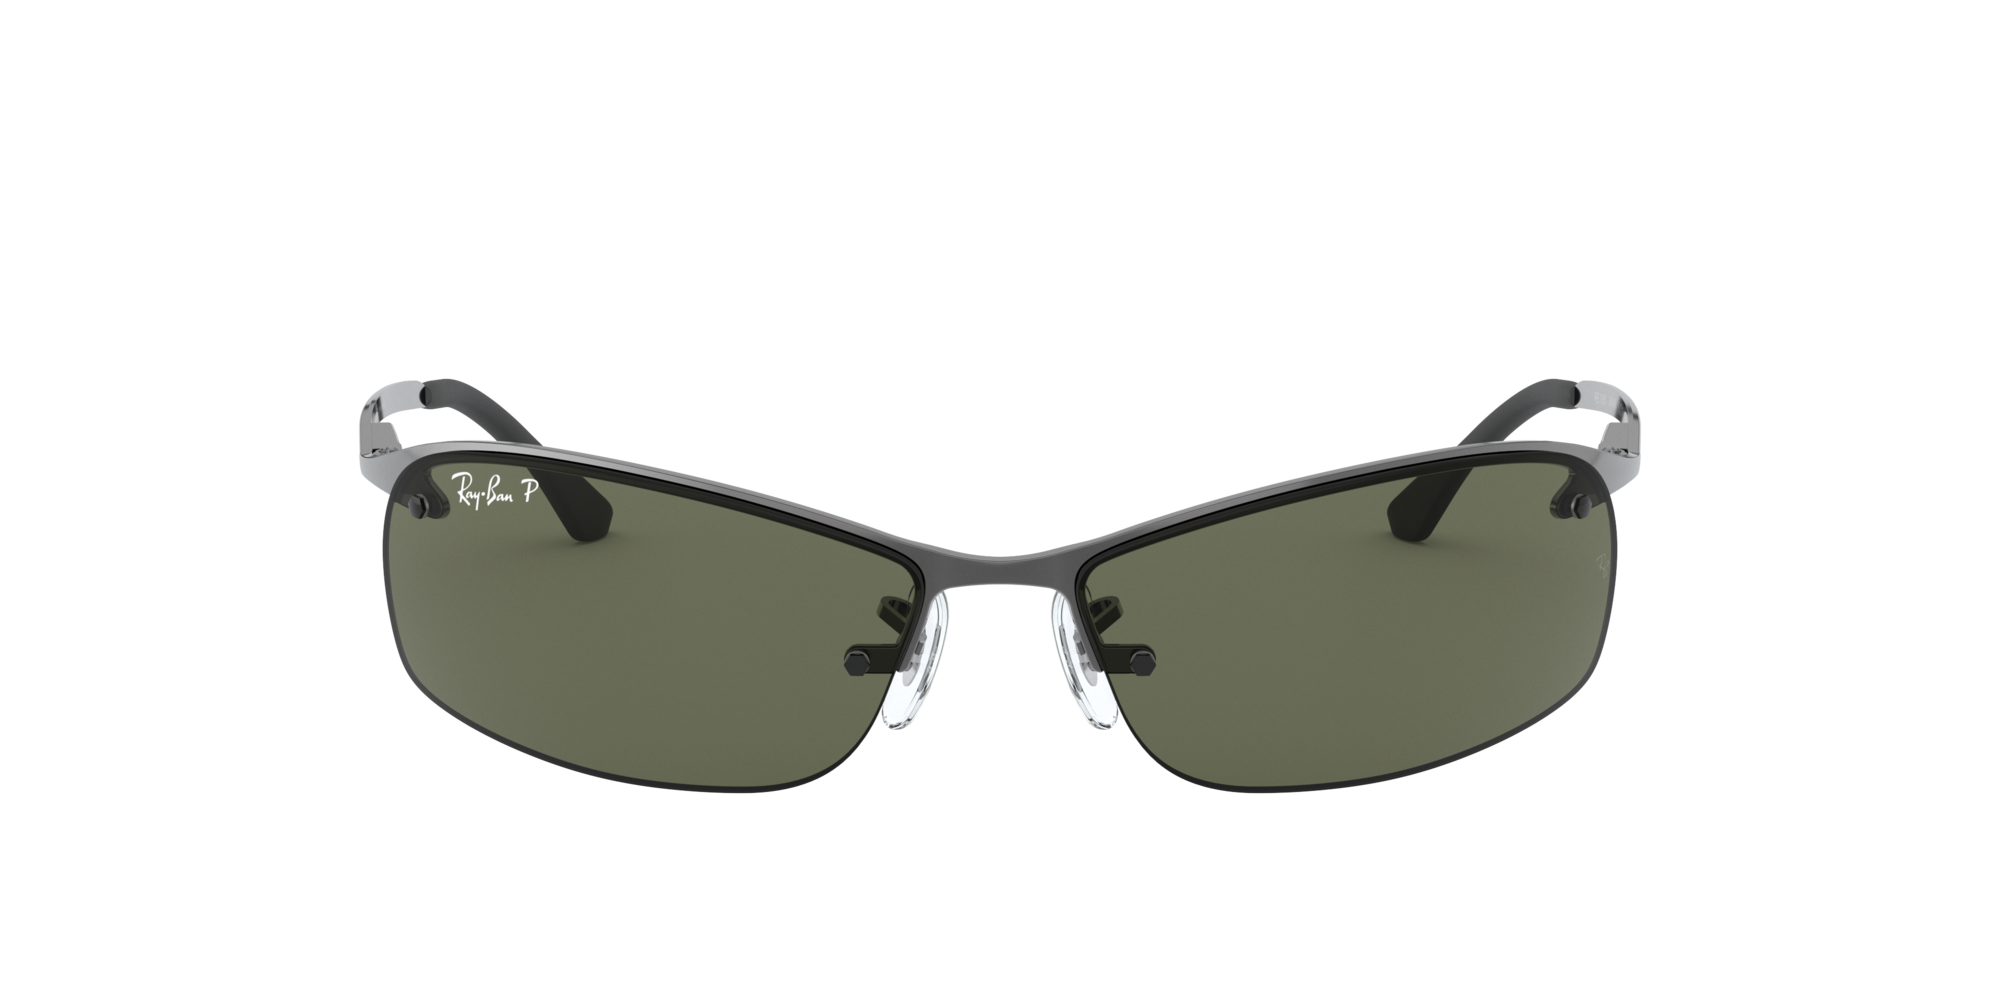 [products.image.front] RAY-BAN RB3183 004/9A